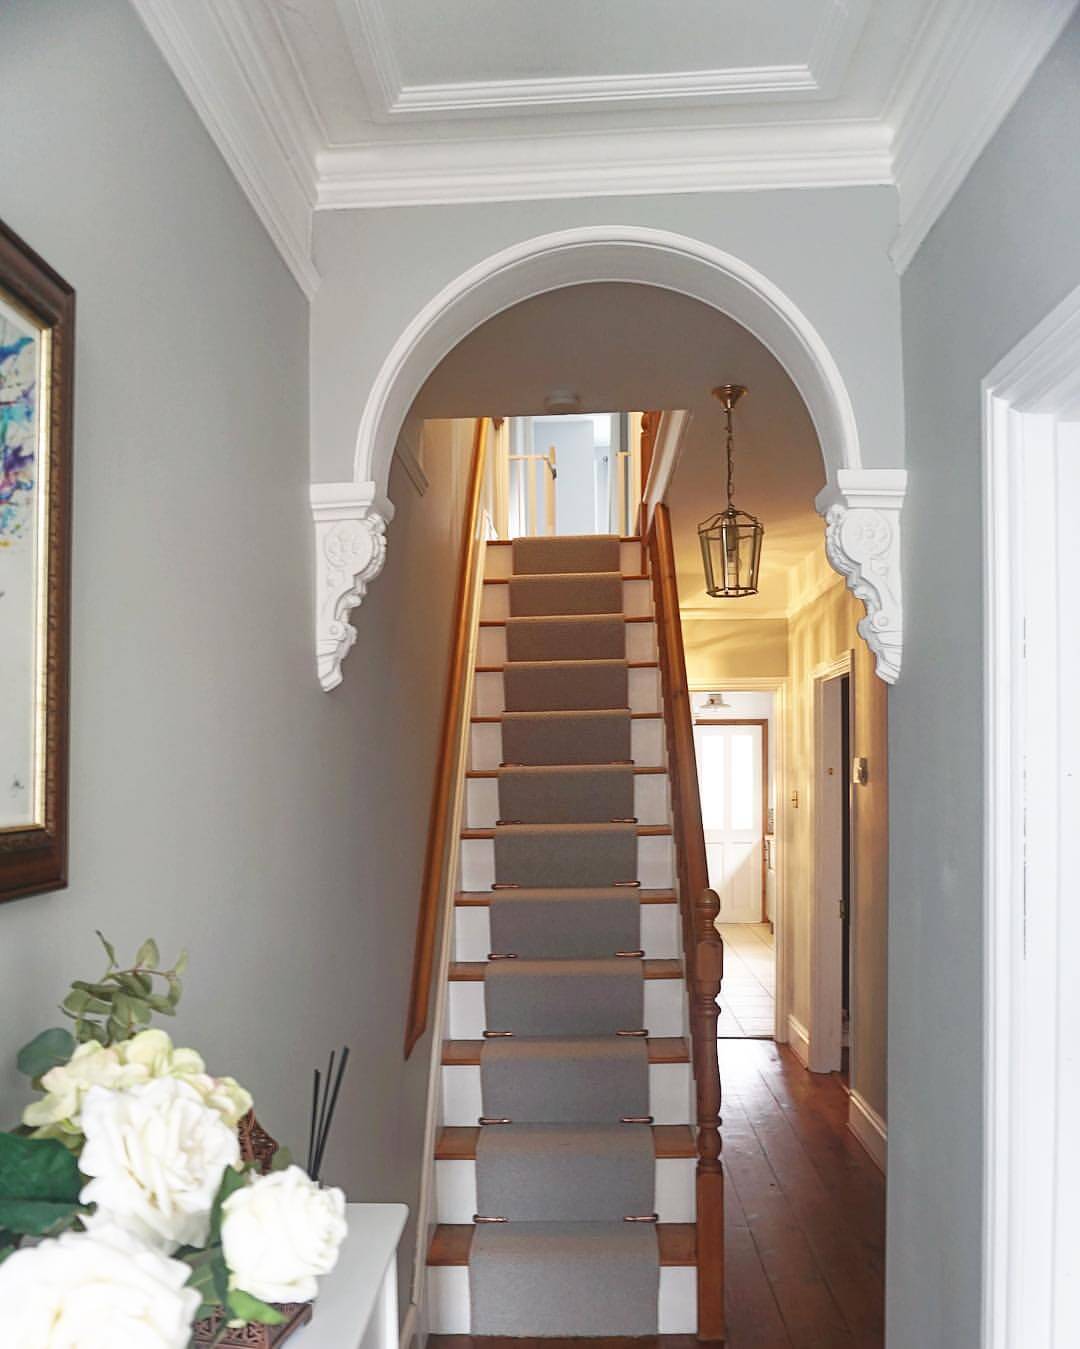 Picture Perfect with a Dimensional Stairway Arch